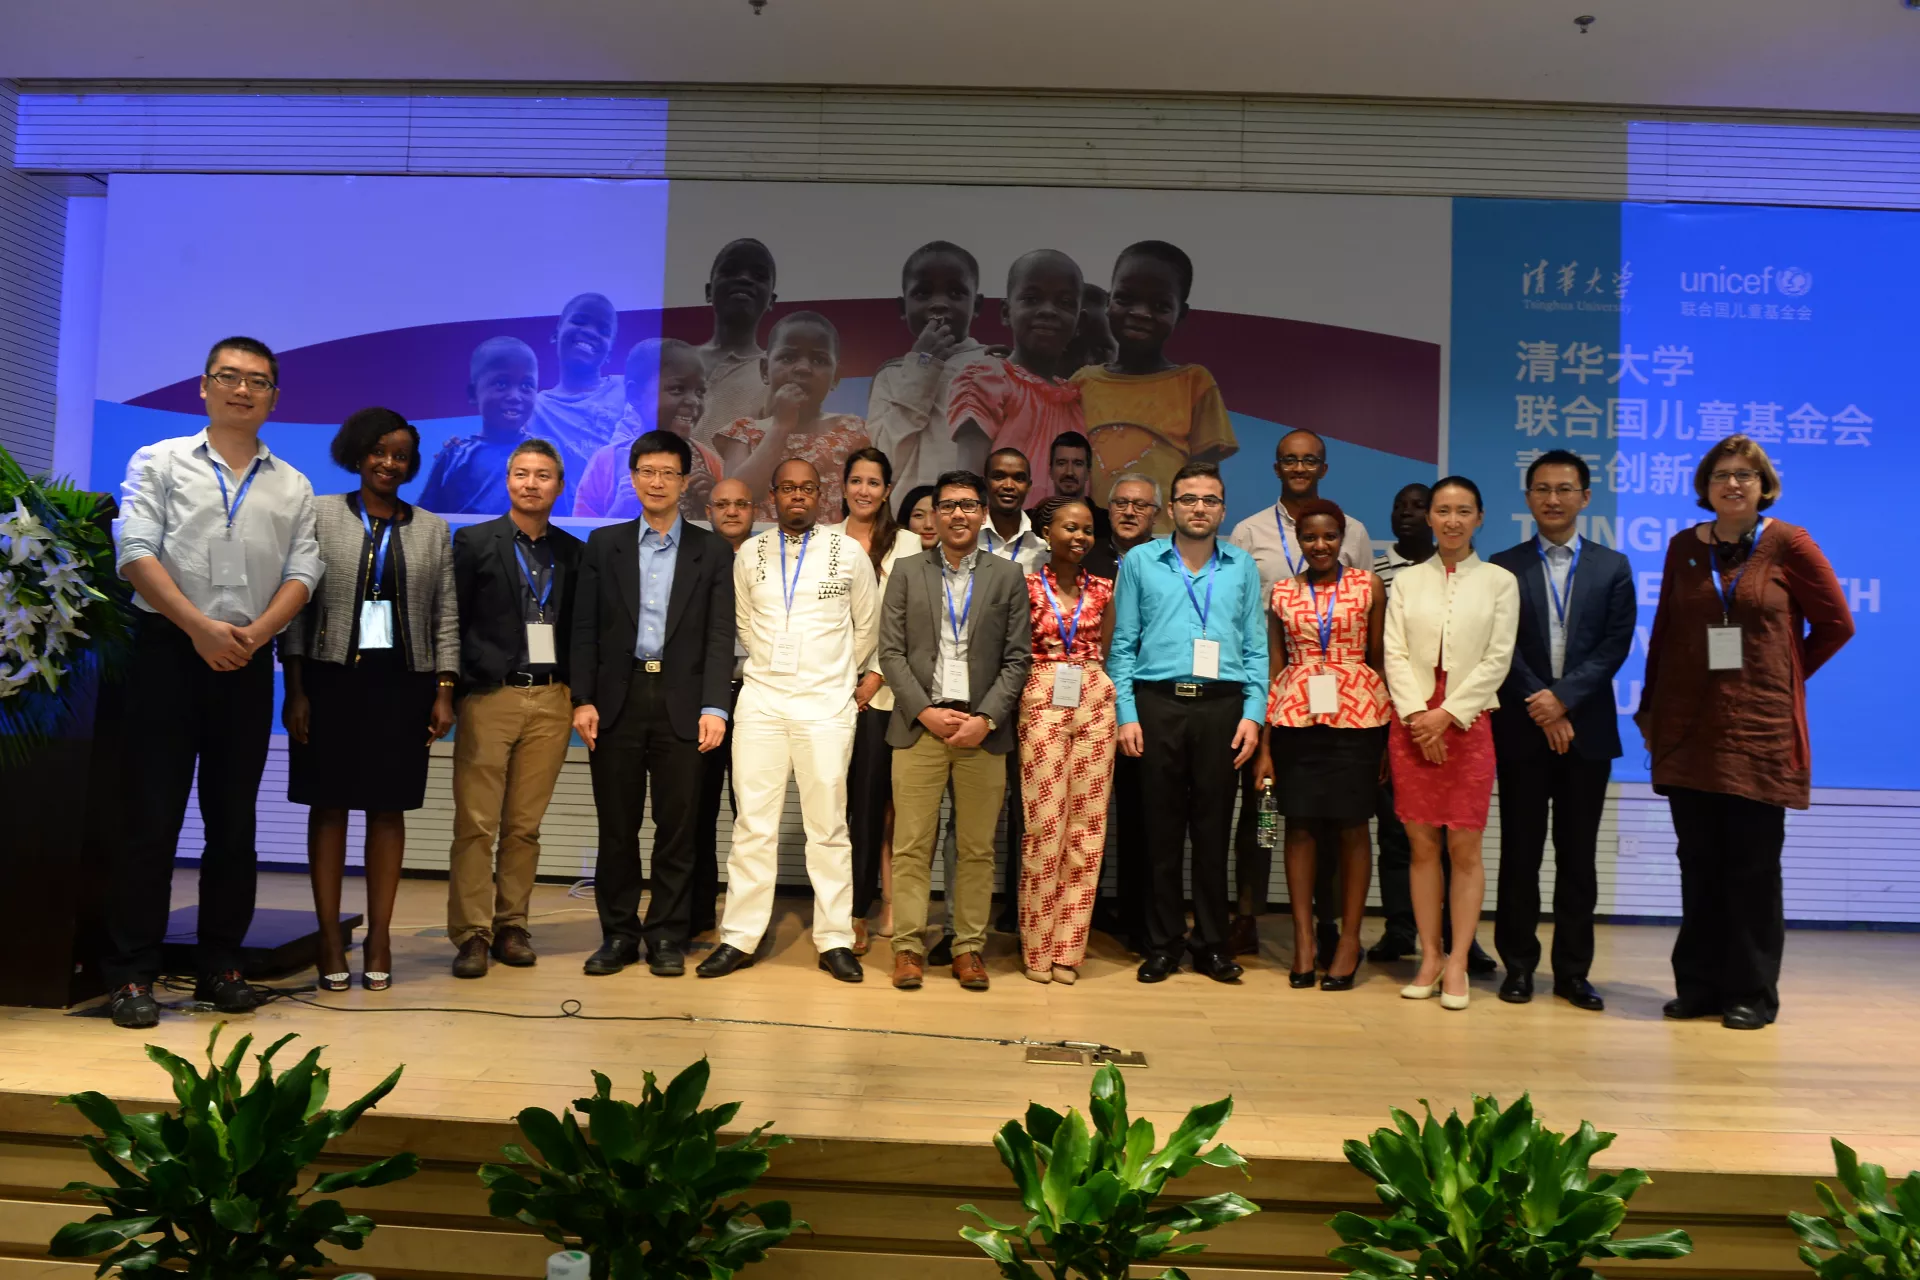 Panelists, young innovators and UNICEF staff at the Tsinghua-UNICEF Youth Innovation Forum.